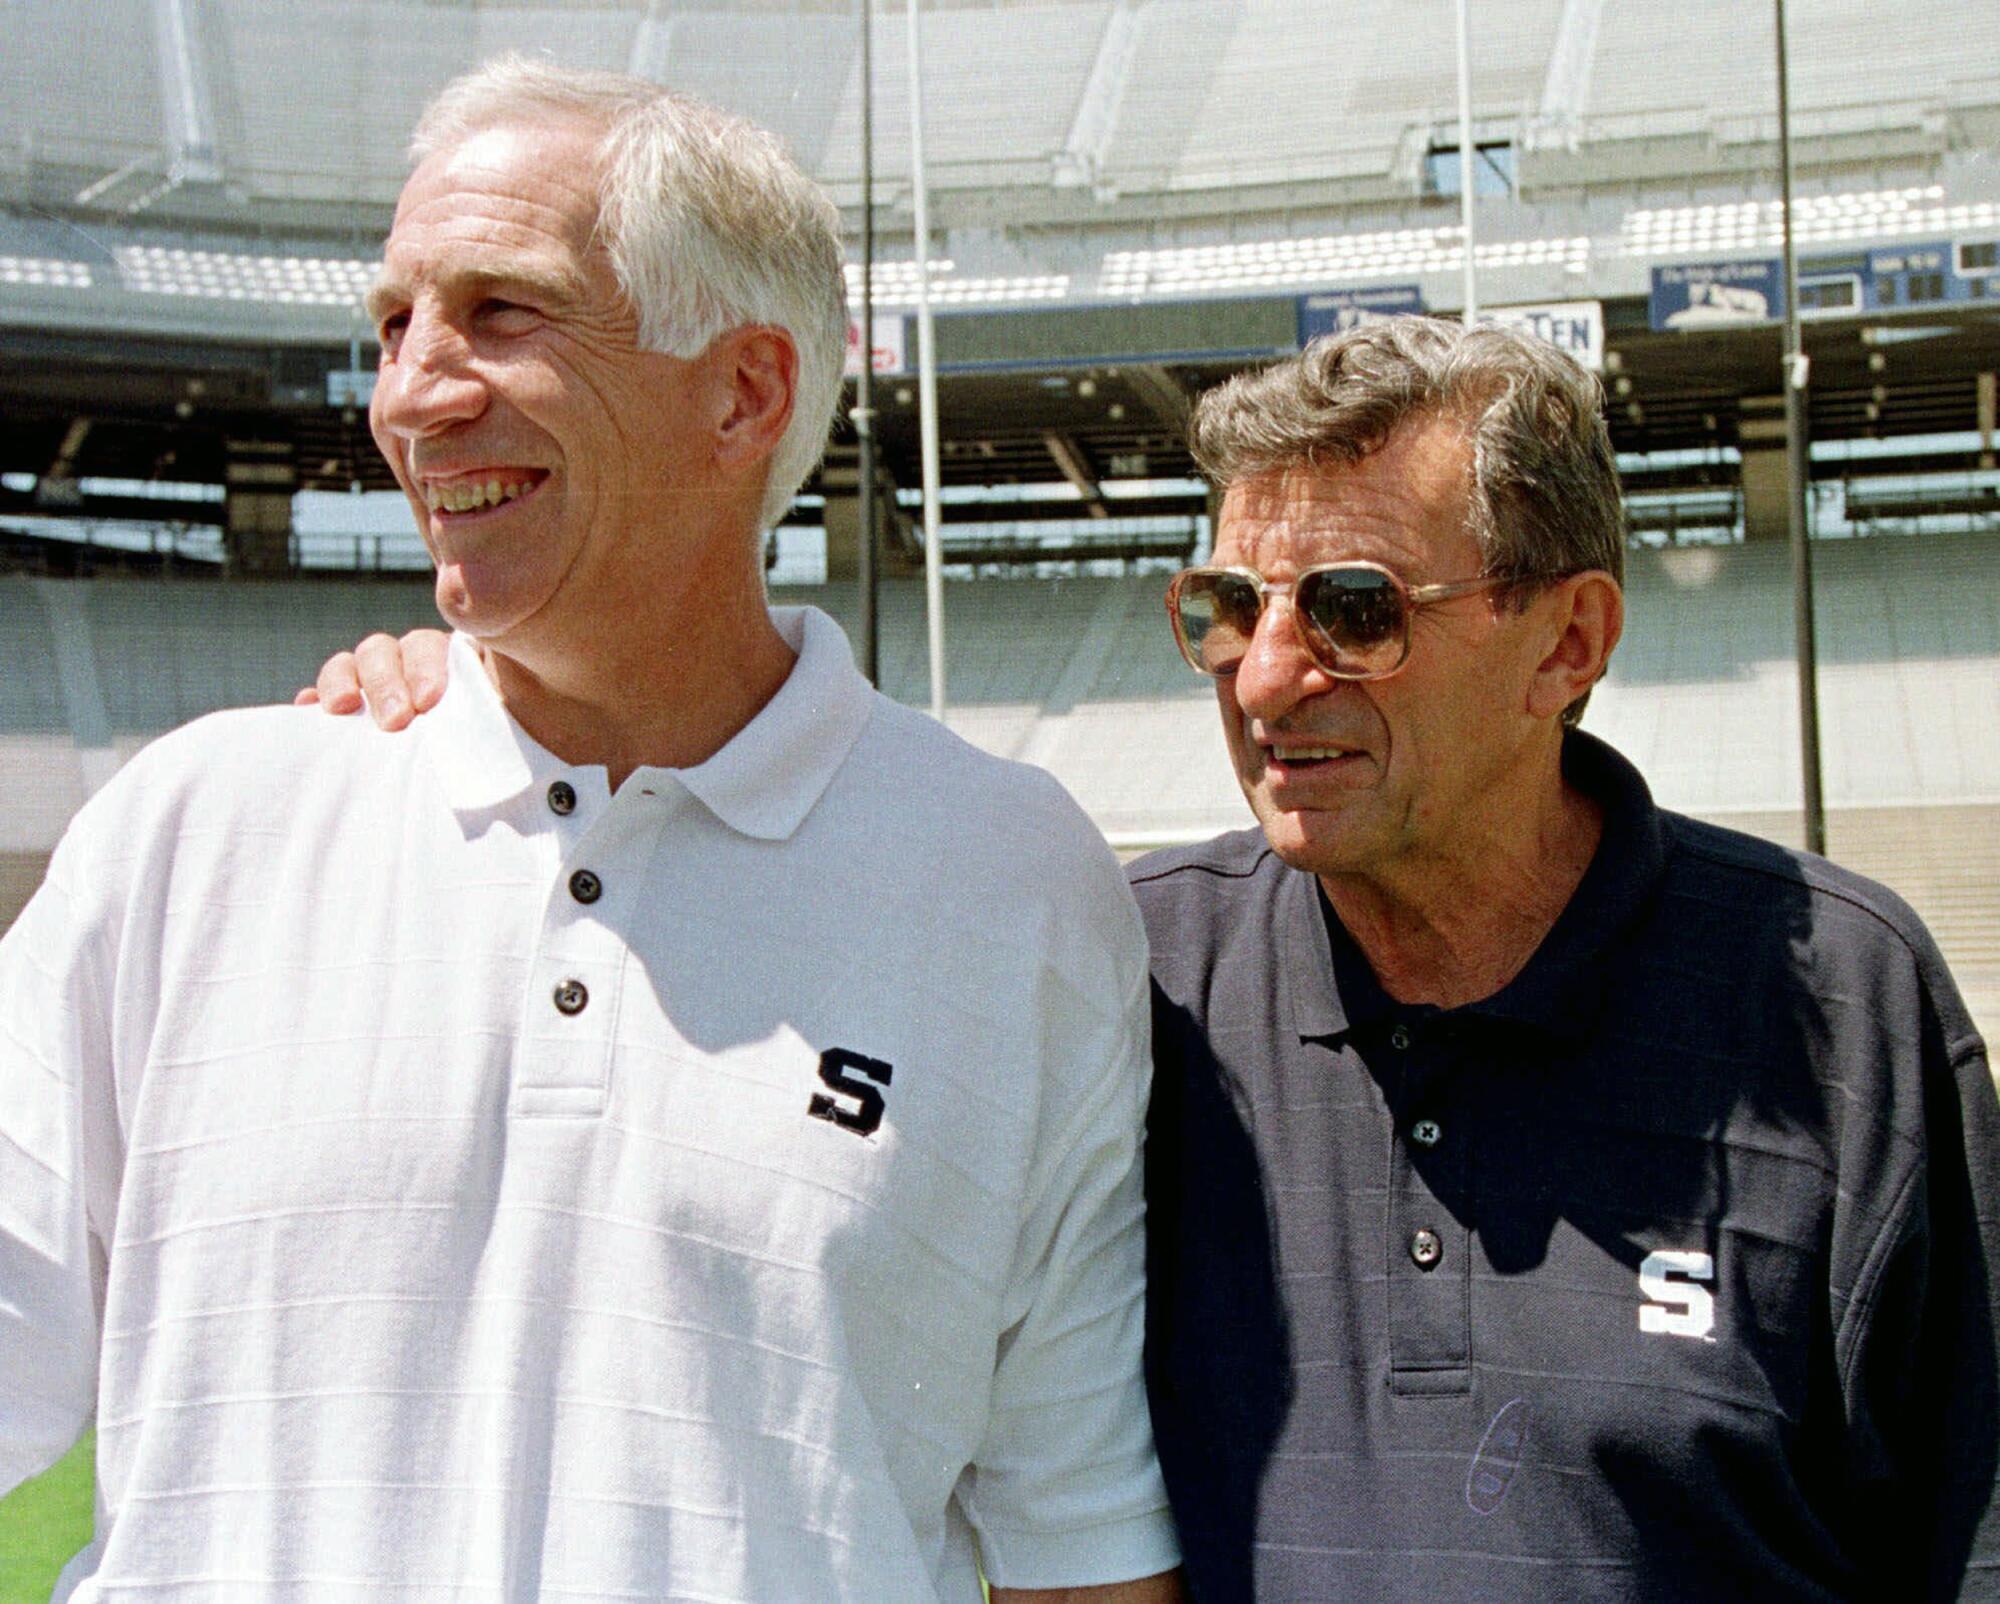 Penn State coach Joe Paterno, right, poses with his arm around defensive coordinator Jerry Sandusky in 1999.